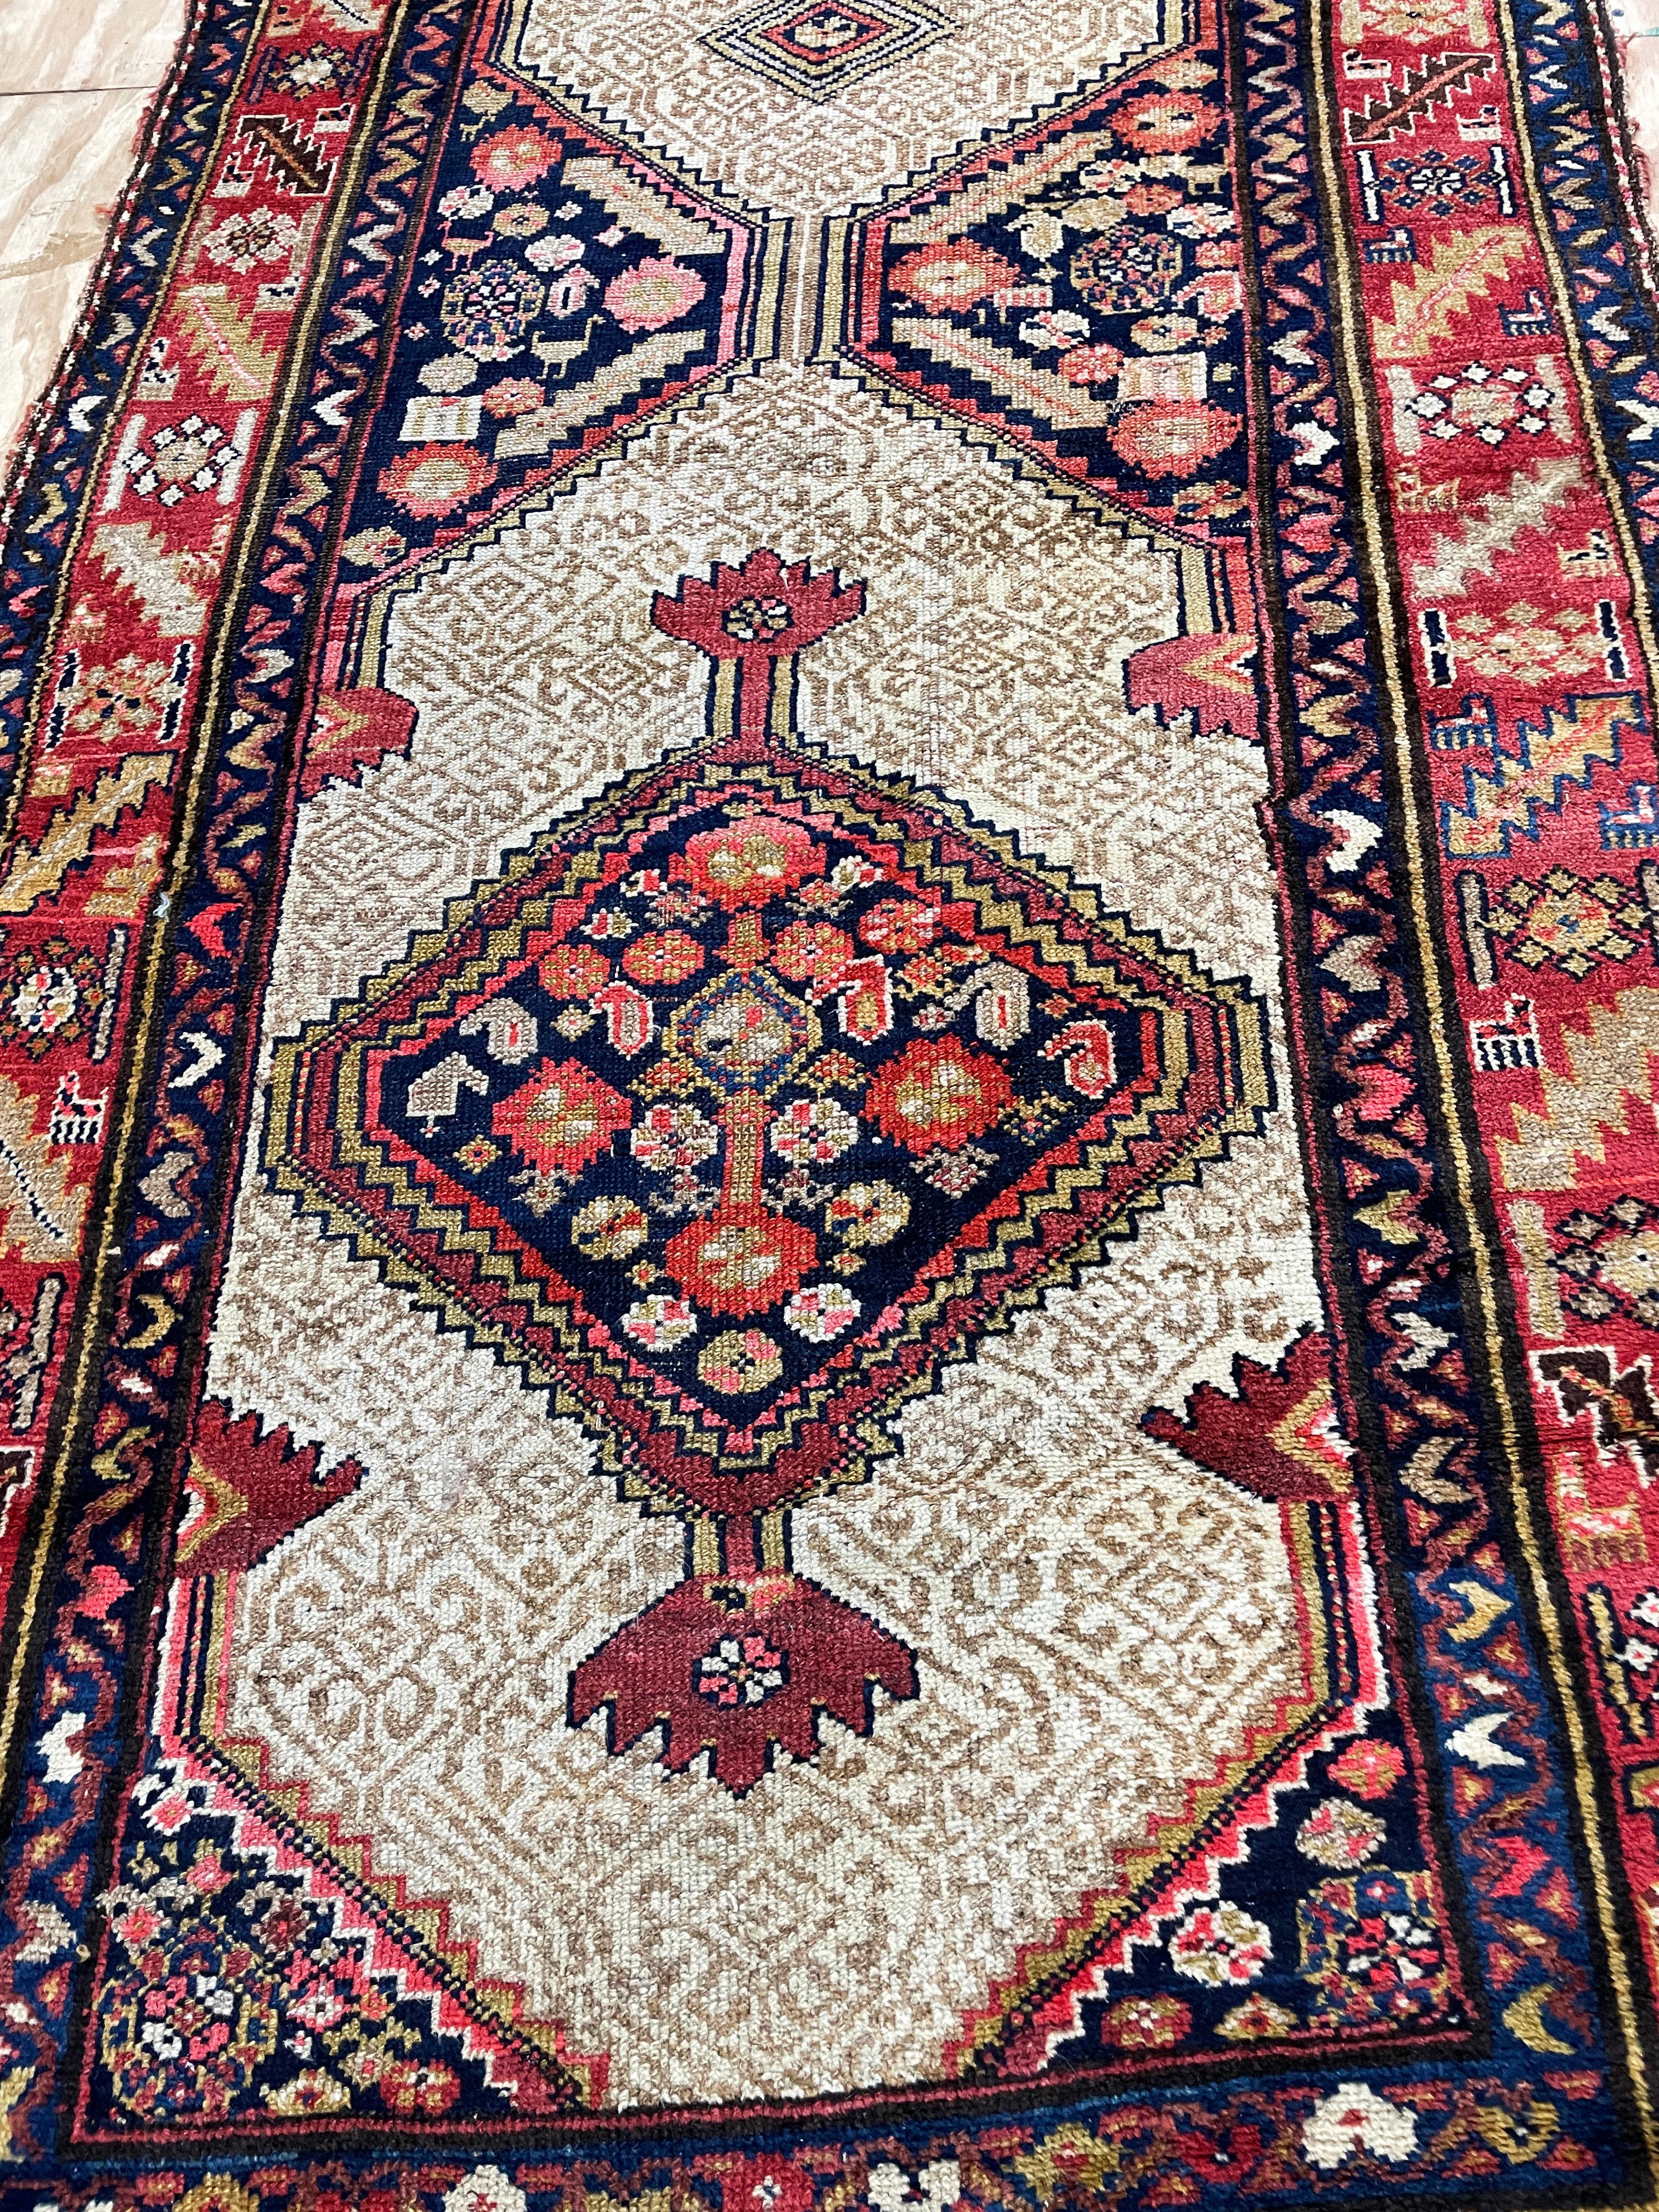 Hand-Knotted Antique Persian Serab/Serapi Runner, Camel Color, c-1880 For Sale